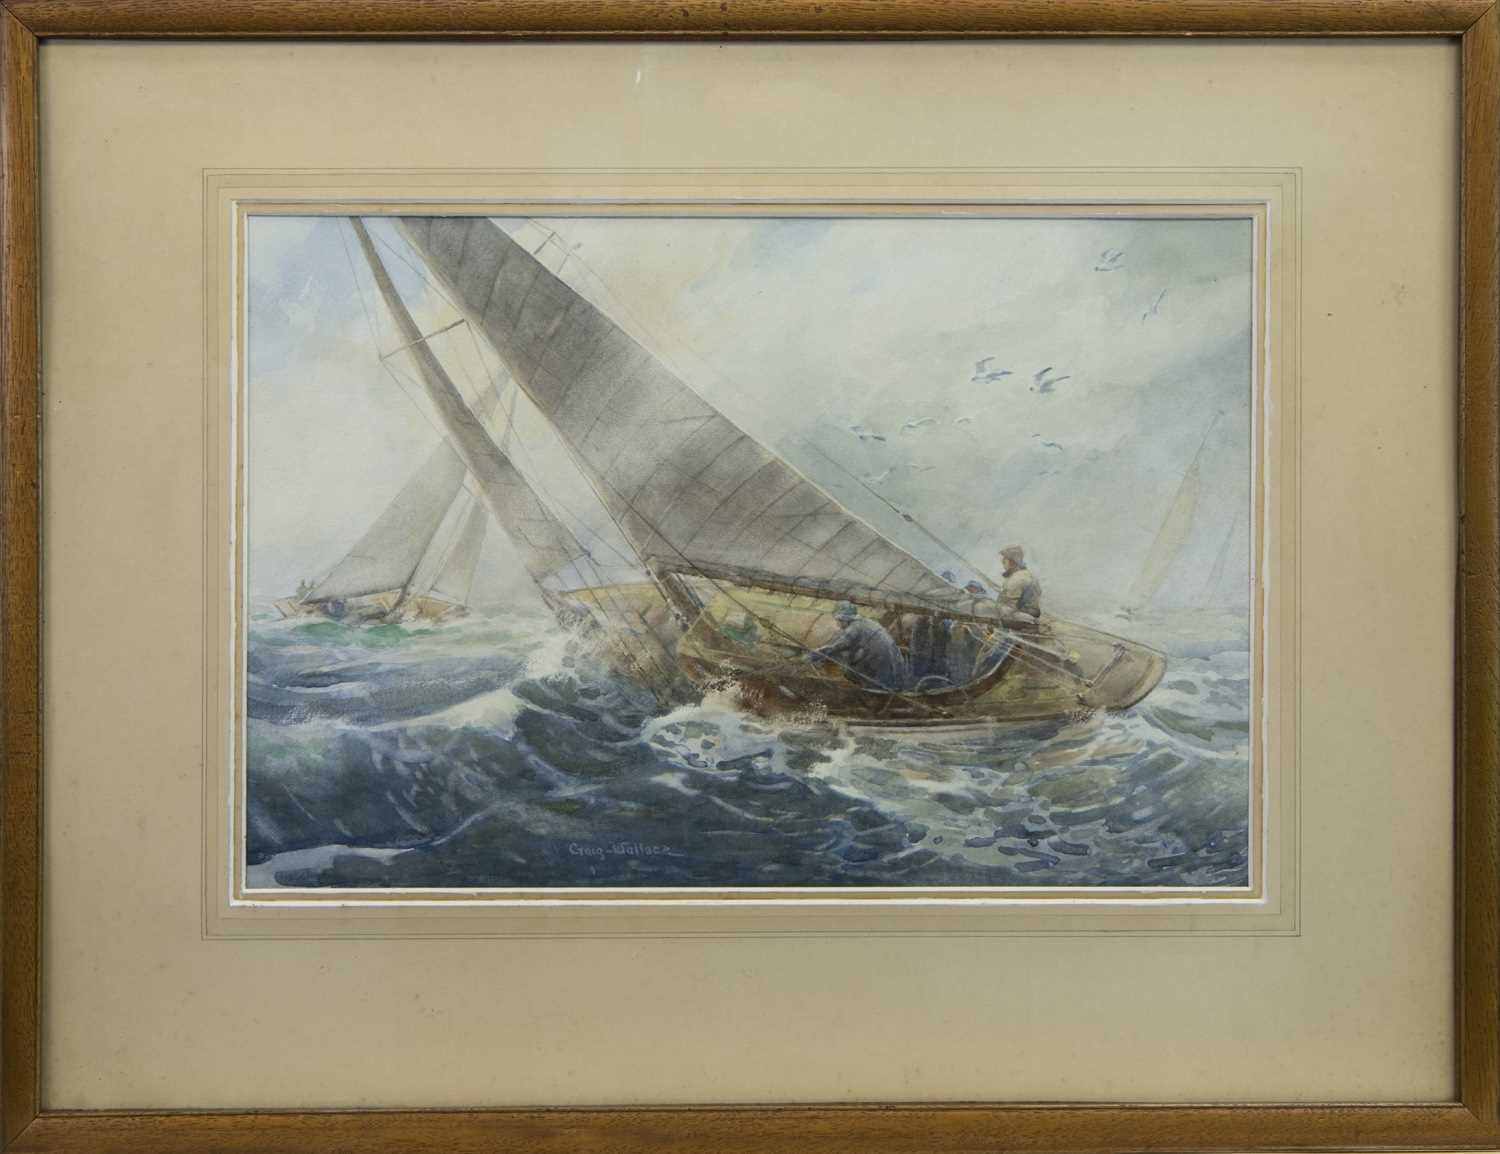 Lot 413 - RACING ON THE CLYDE, 1930, A WATERCOLOUR BY ROBERT CRAIG WALLACE